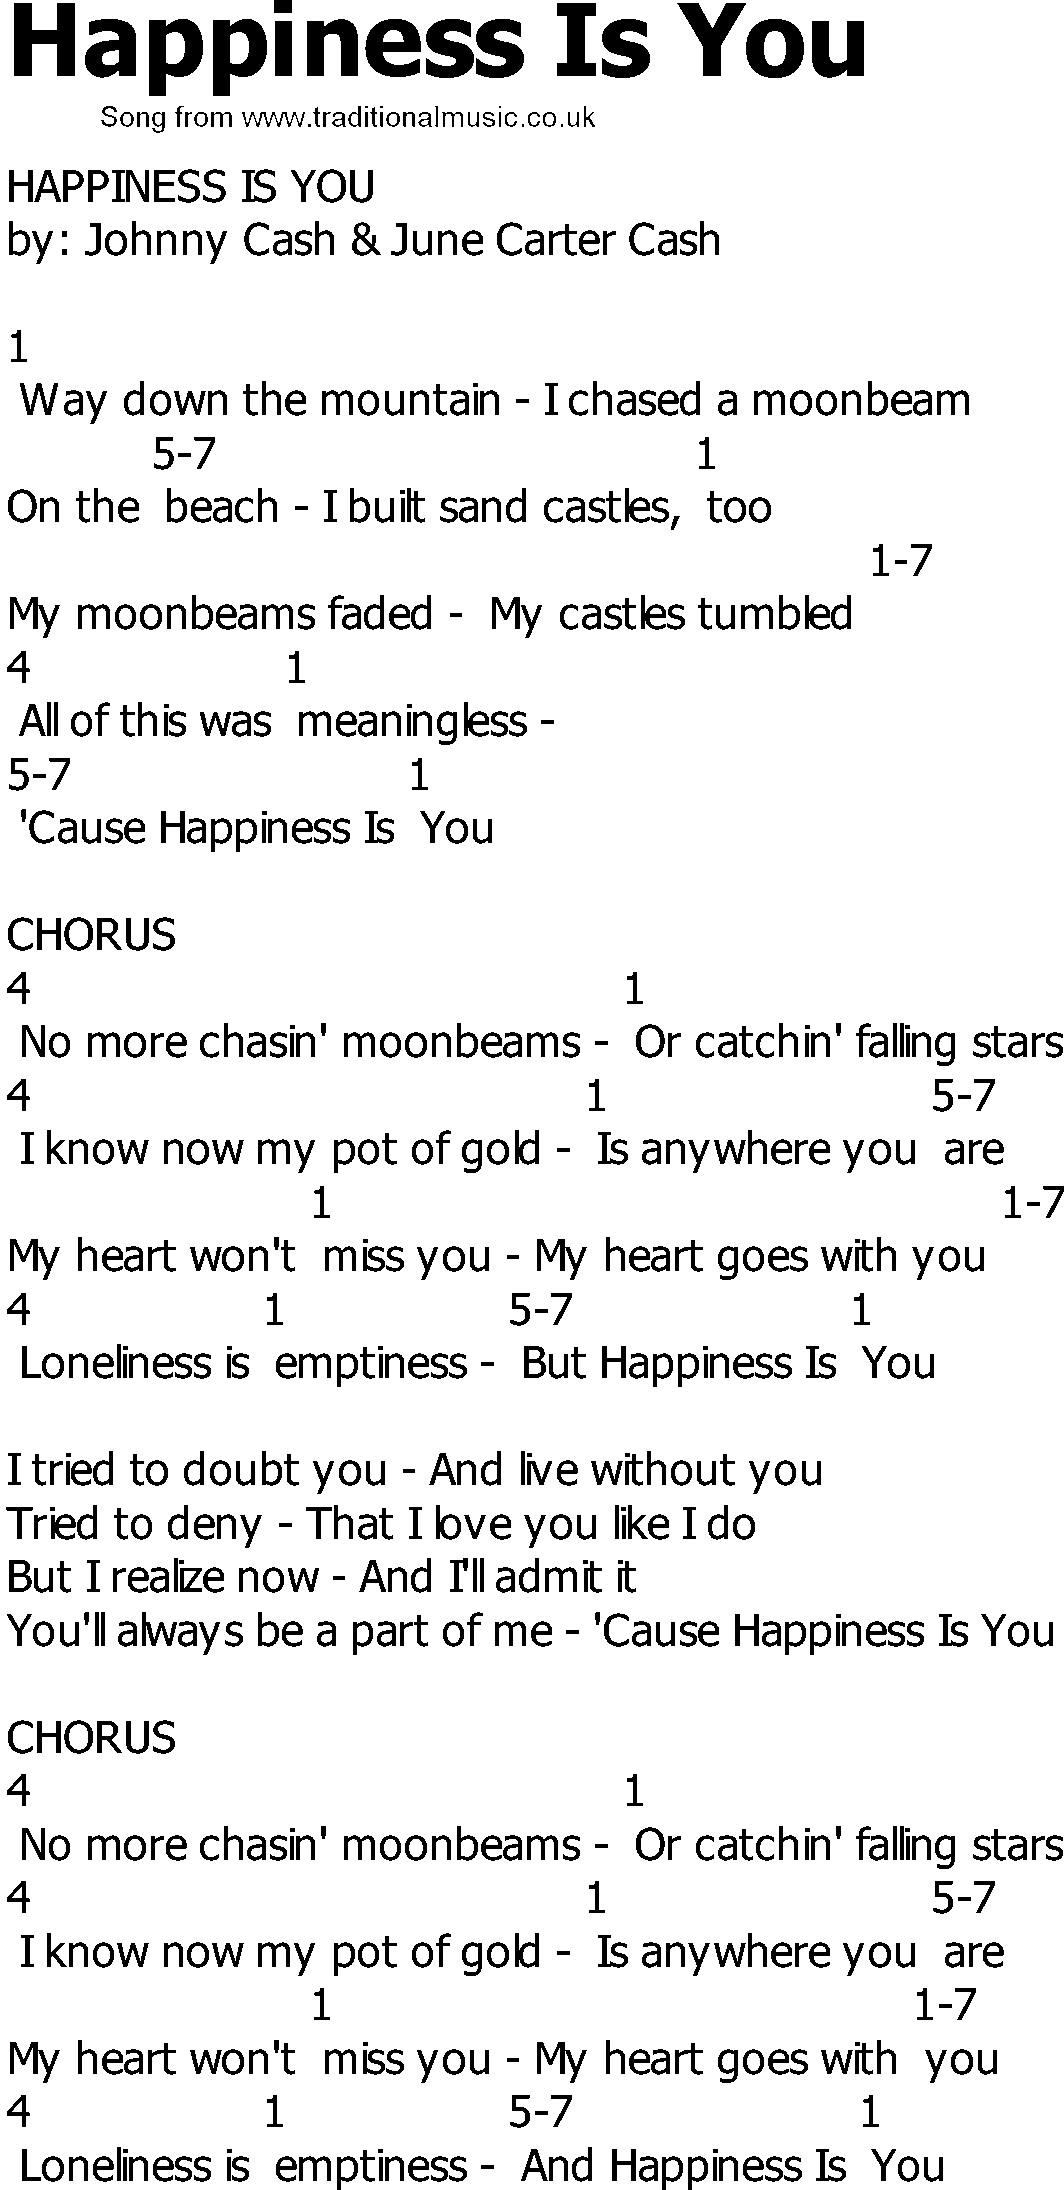 Old Country song lyrics with chords - Happiness Is You